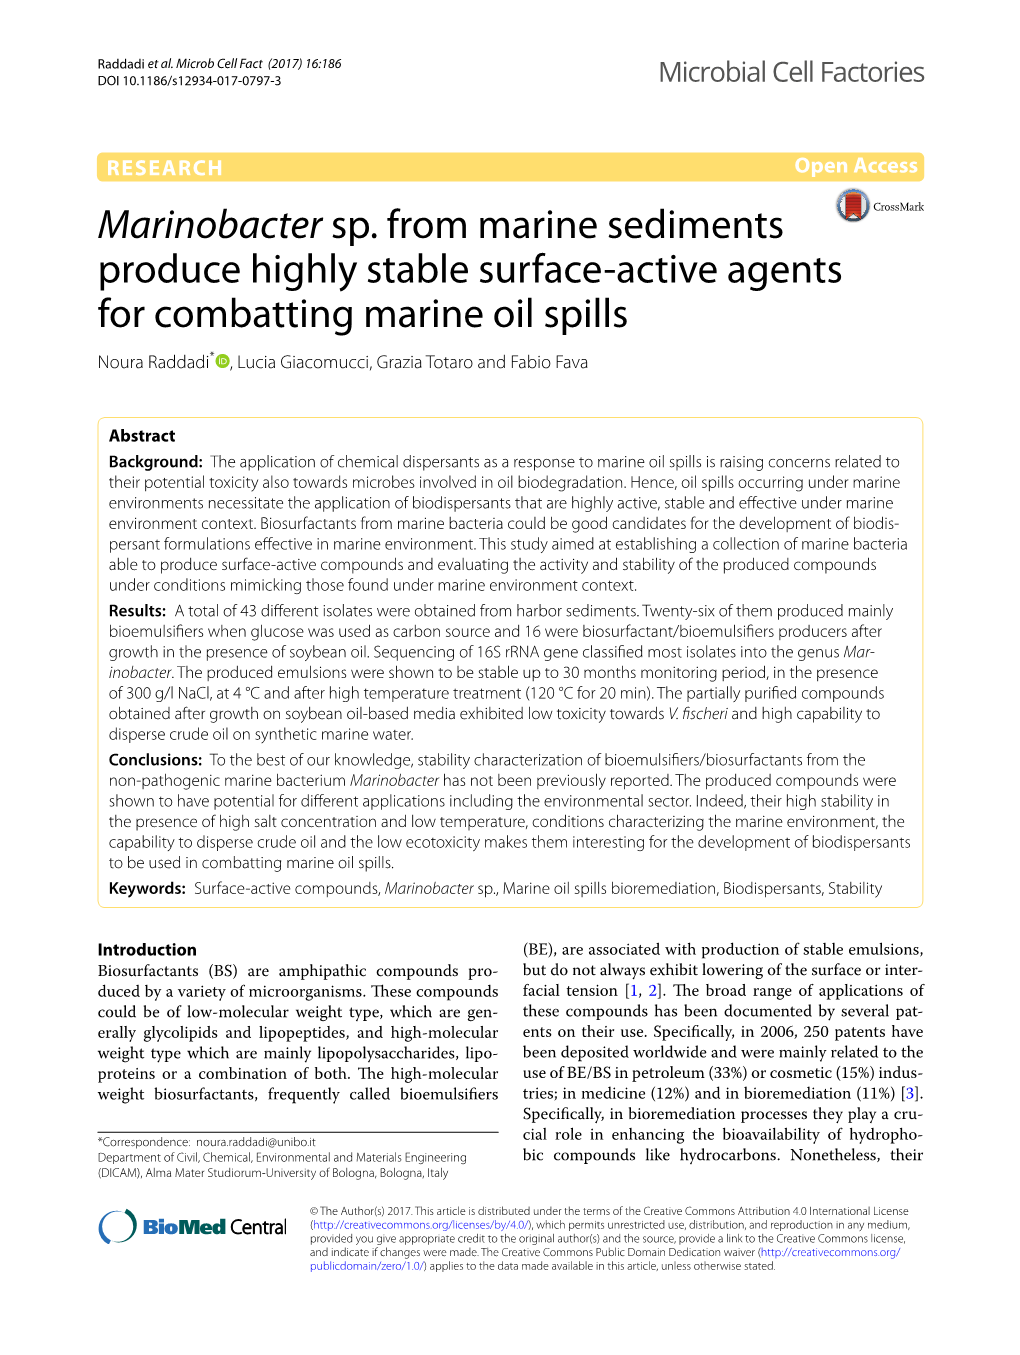 Marinobacter Sp. from Marine Sediments Produce Highly Stable